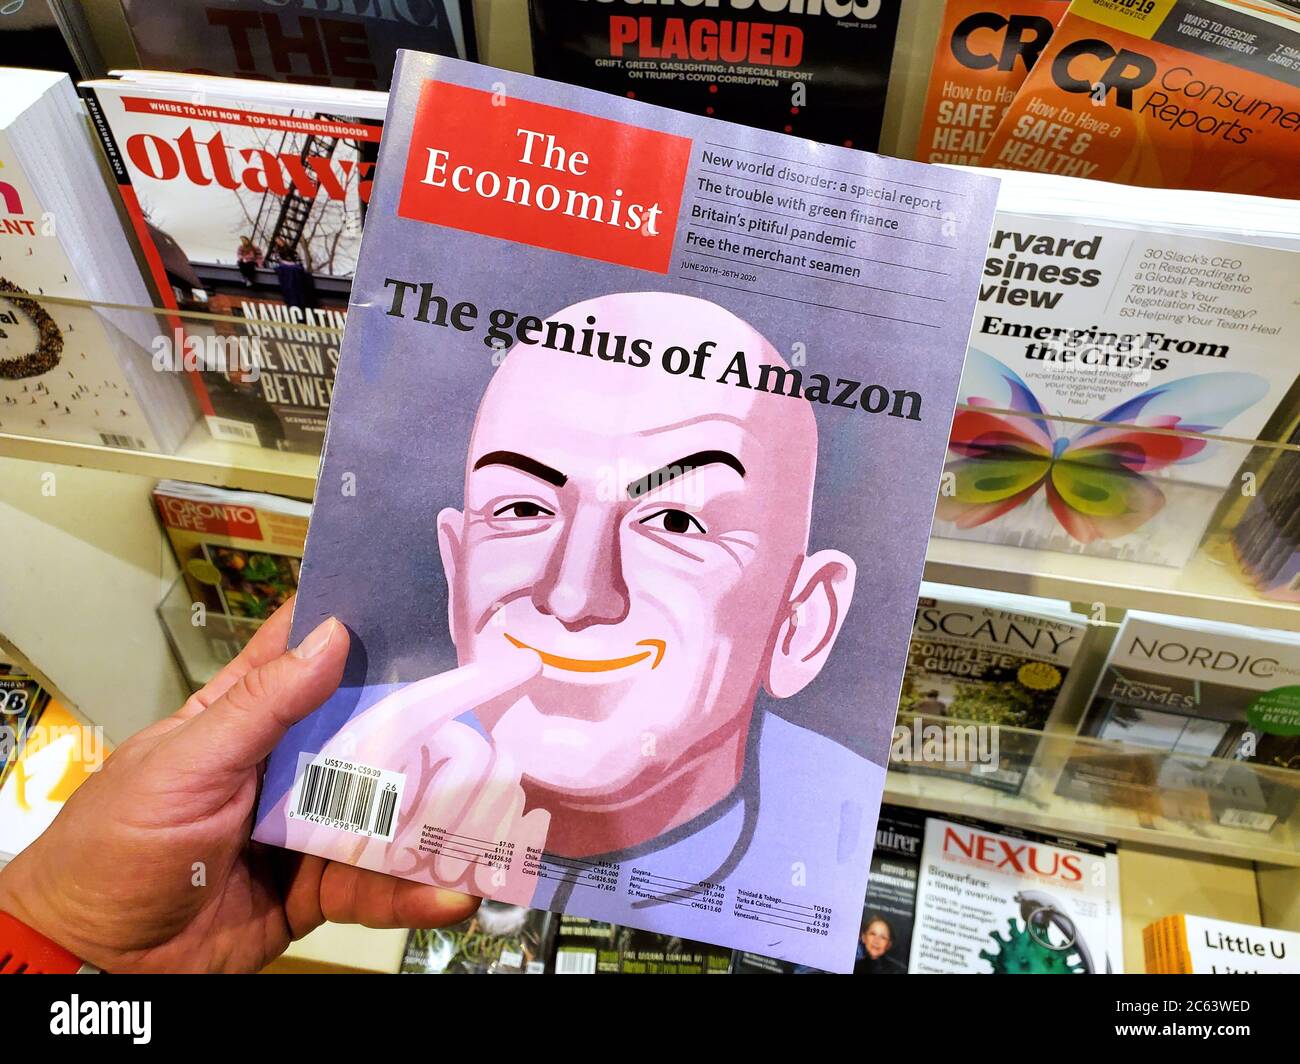 Montreal, Canada - June 30, 2020: The genius of Amazon title and a picture of Jeff Bezos as the Dr Evil on The Economist newspaper in a hand over a st Stock Photo